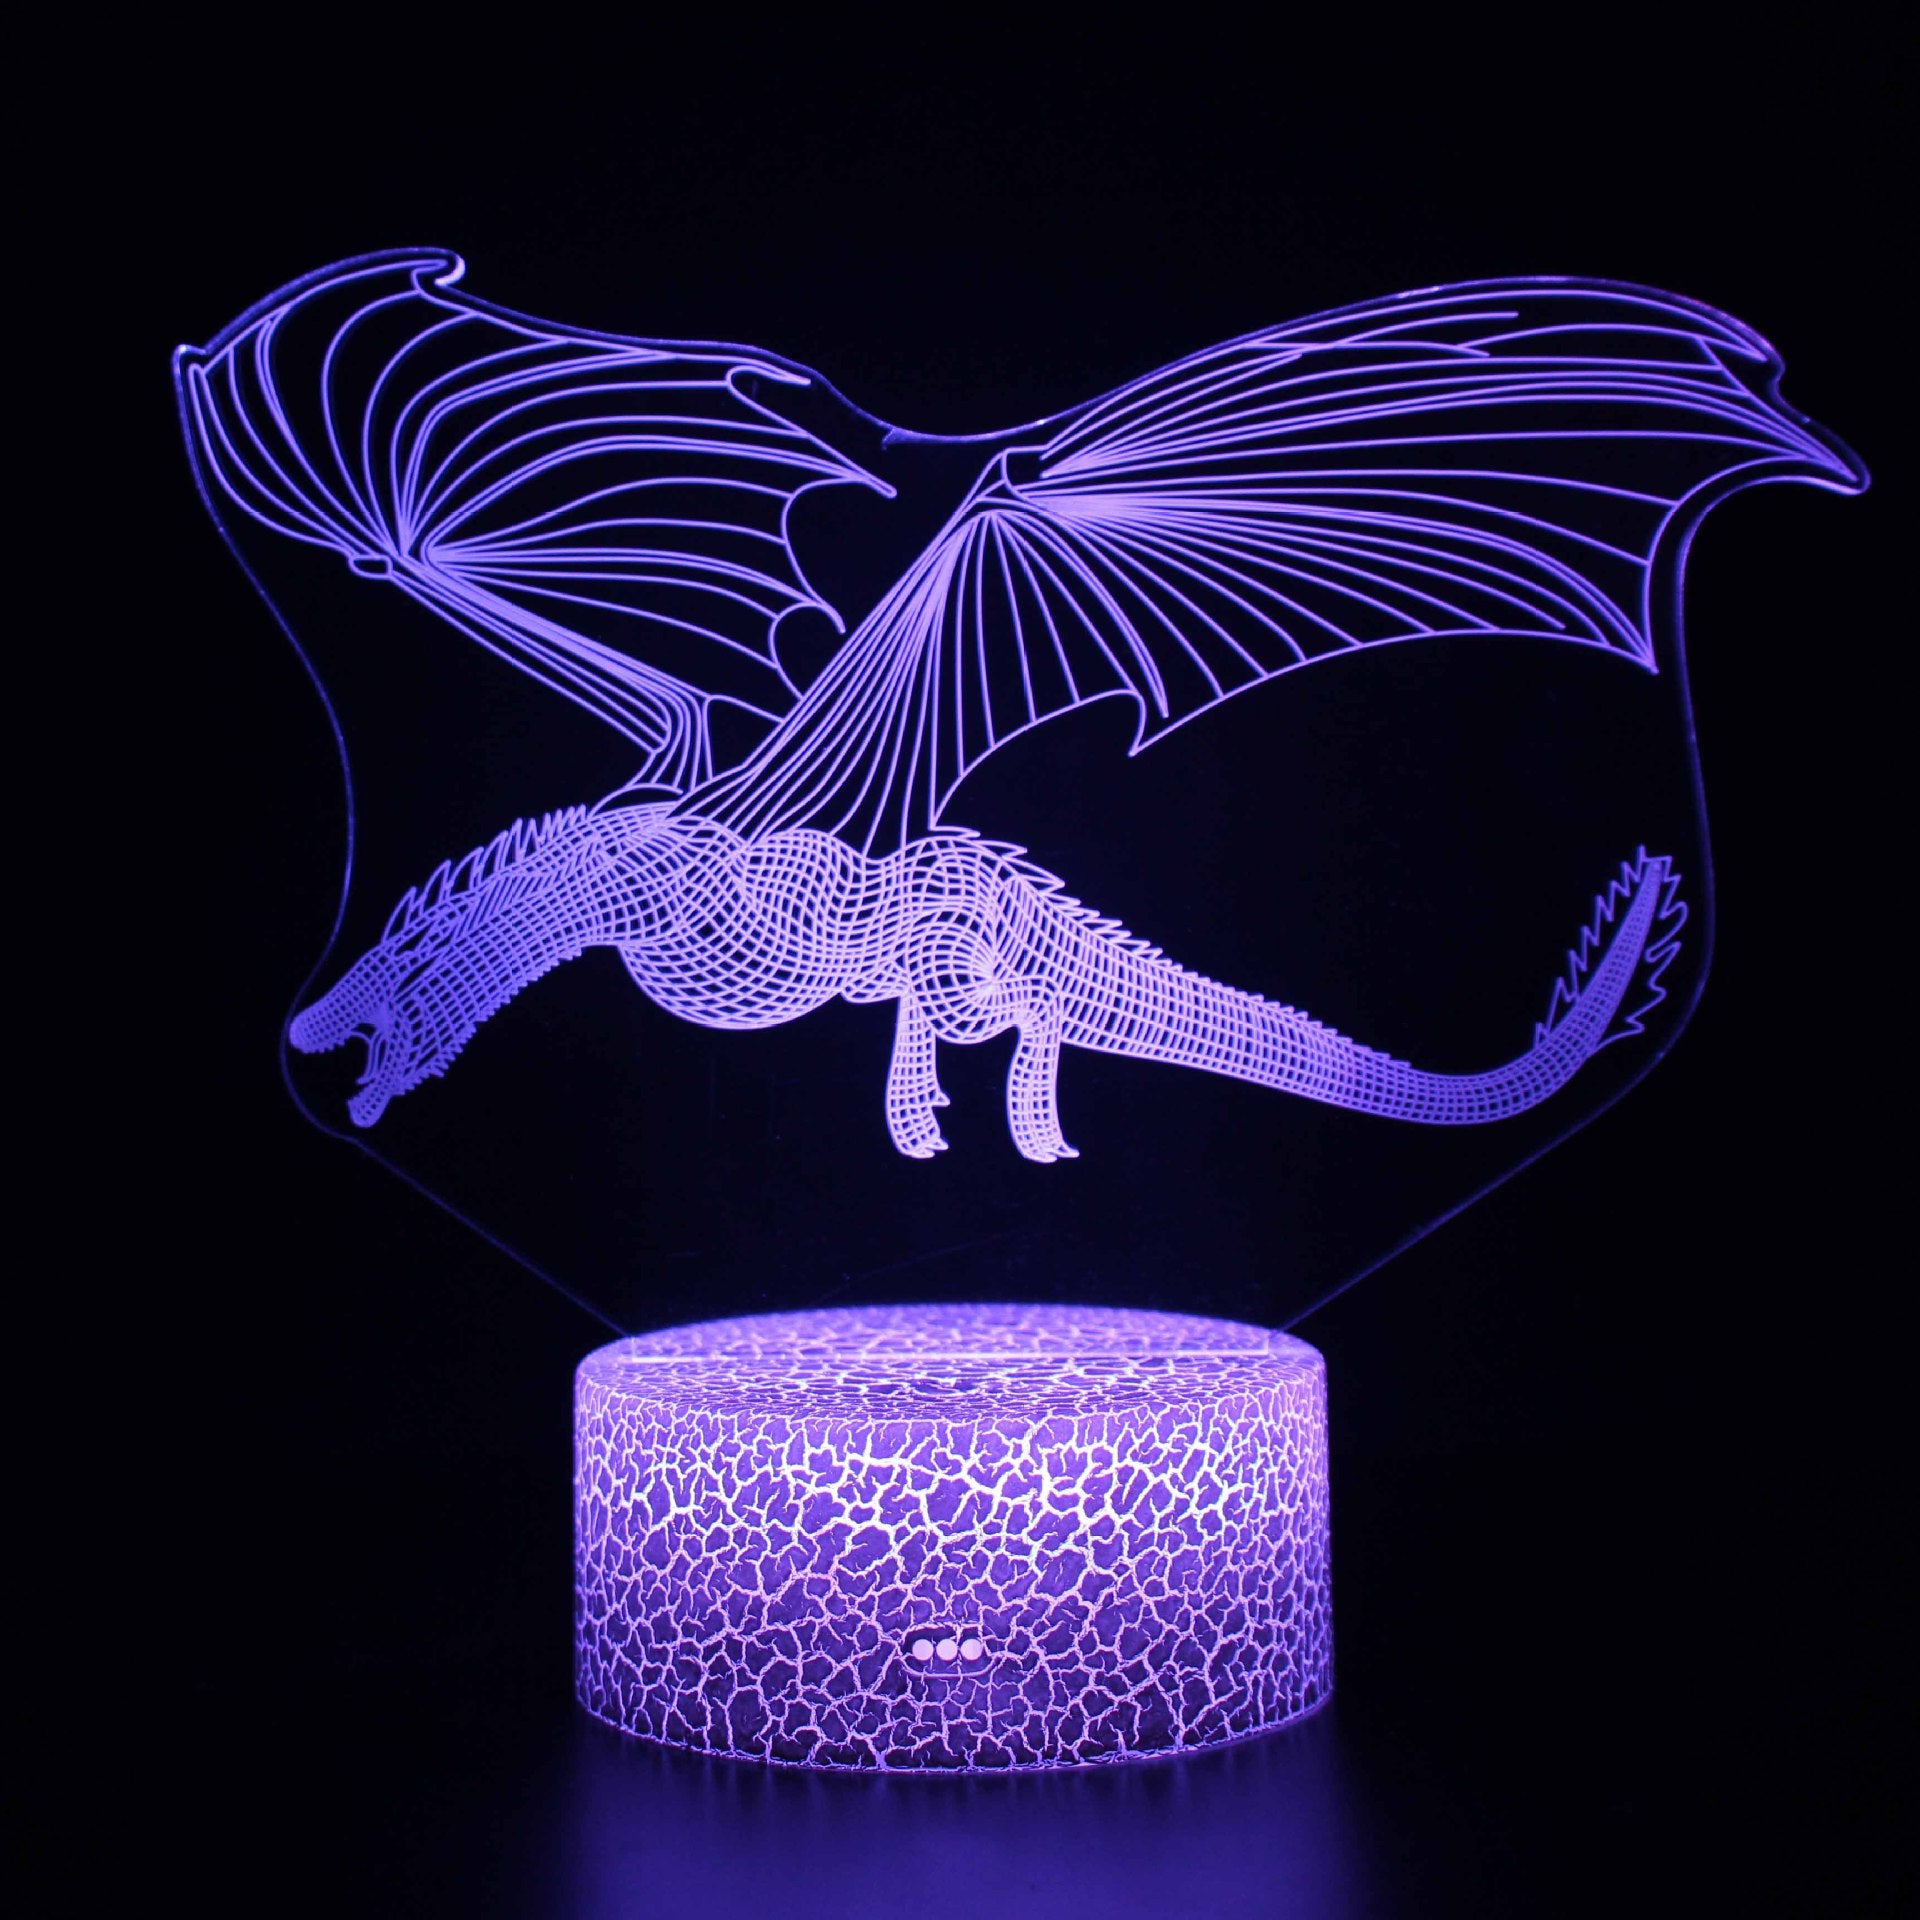 Dinosaur series 3D night light led remote control colorful touch light